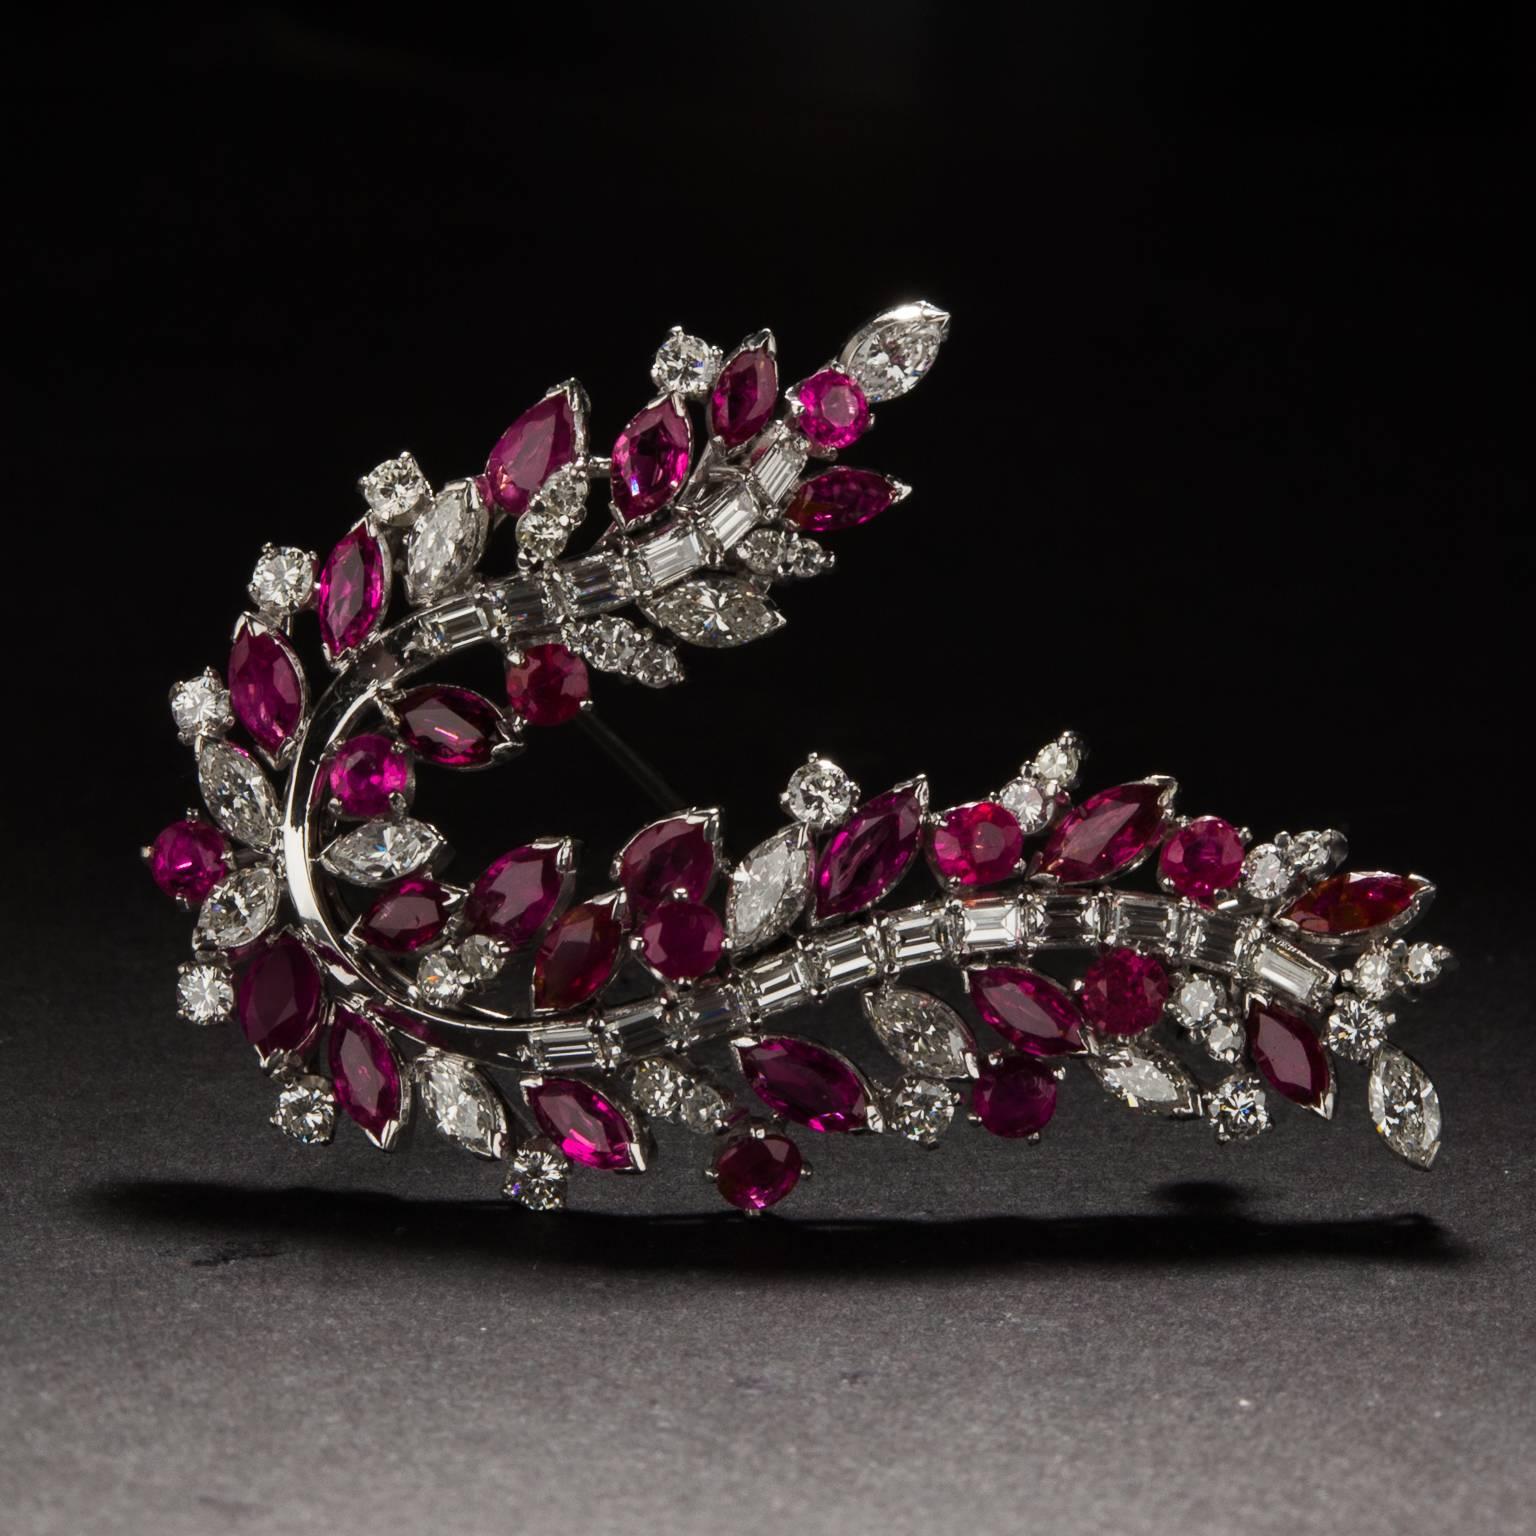 This brooch displays a graceful garland of plentiful rubies and diamonds. Crafted in 18 karat white gold, it houses 3 carats of rubies, in marquee and round cuts, and 2.5 carats of diamonds, in marquee, round, and baguette cuts. The variety of